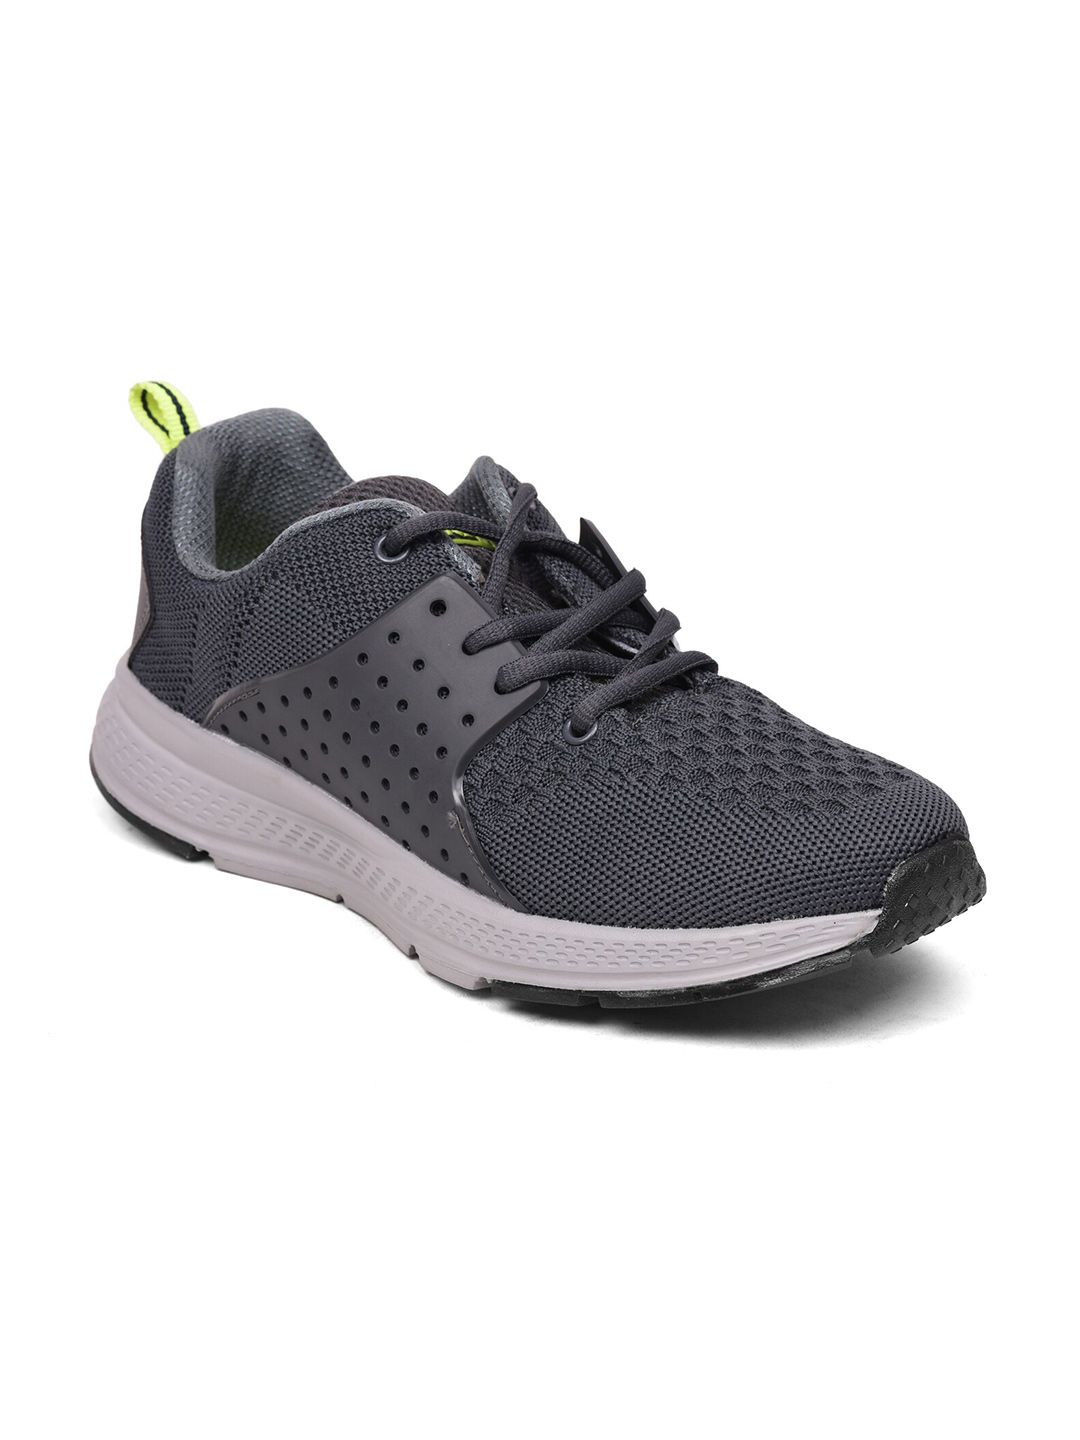 Liberty Women Charcoal Mesh Running Non-Marking Shoes Price in India